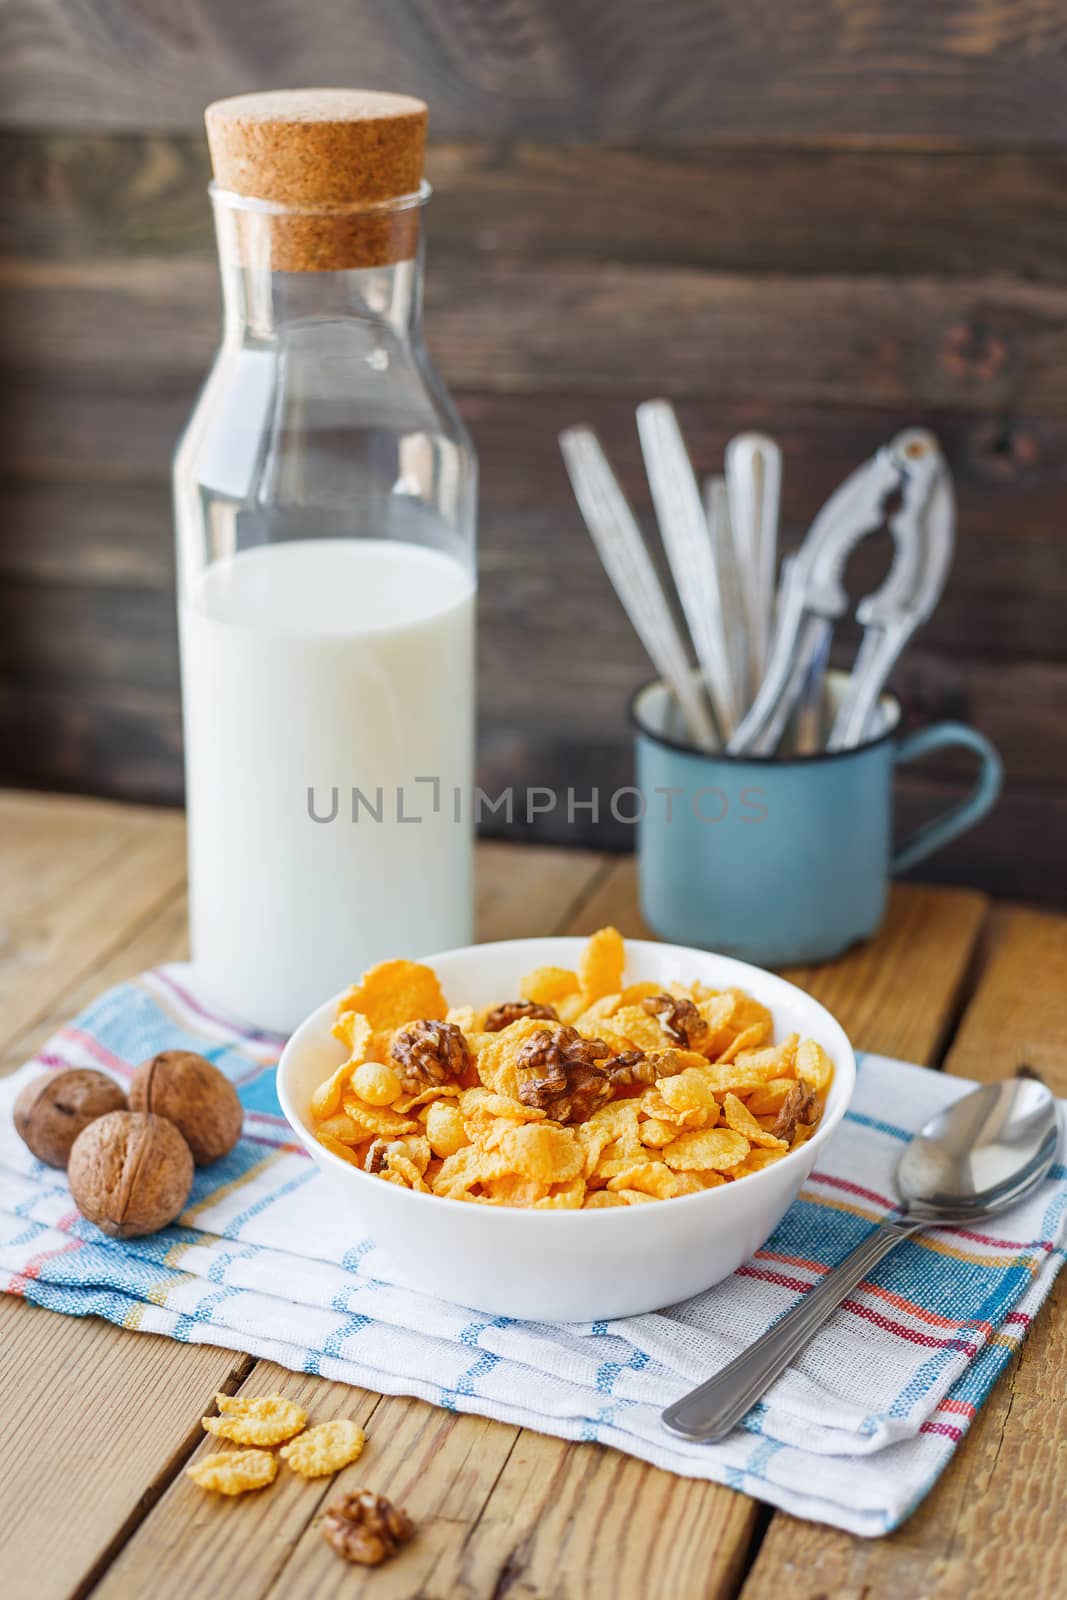 Tasty corn flakes with walnuts in bowl with bottle of milk. Rustic wooden background with plaid napkin. Healthy crispy breakfast snack.